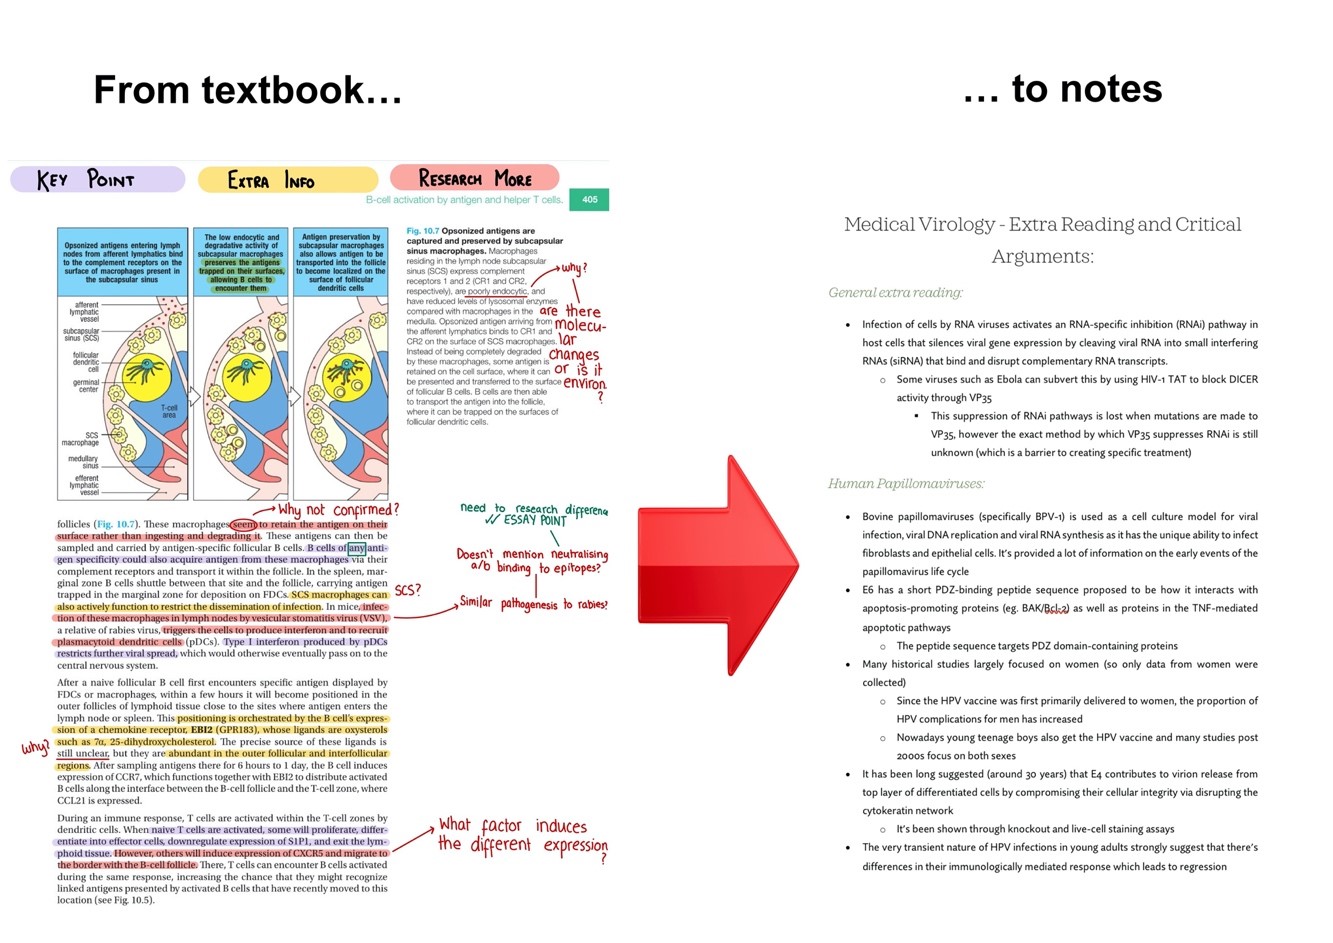 On the left hand side, a page from a textbook with sentences highlighted in different colours and questions handwritten in the margins. On the right hand side, a typed page of notes summarising the textbook page.